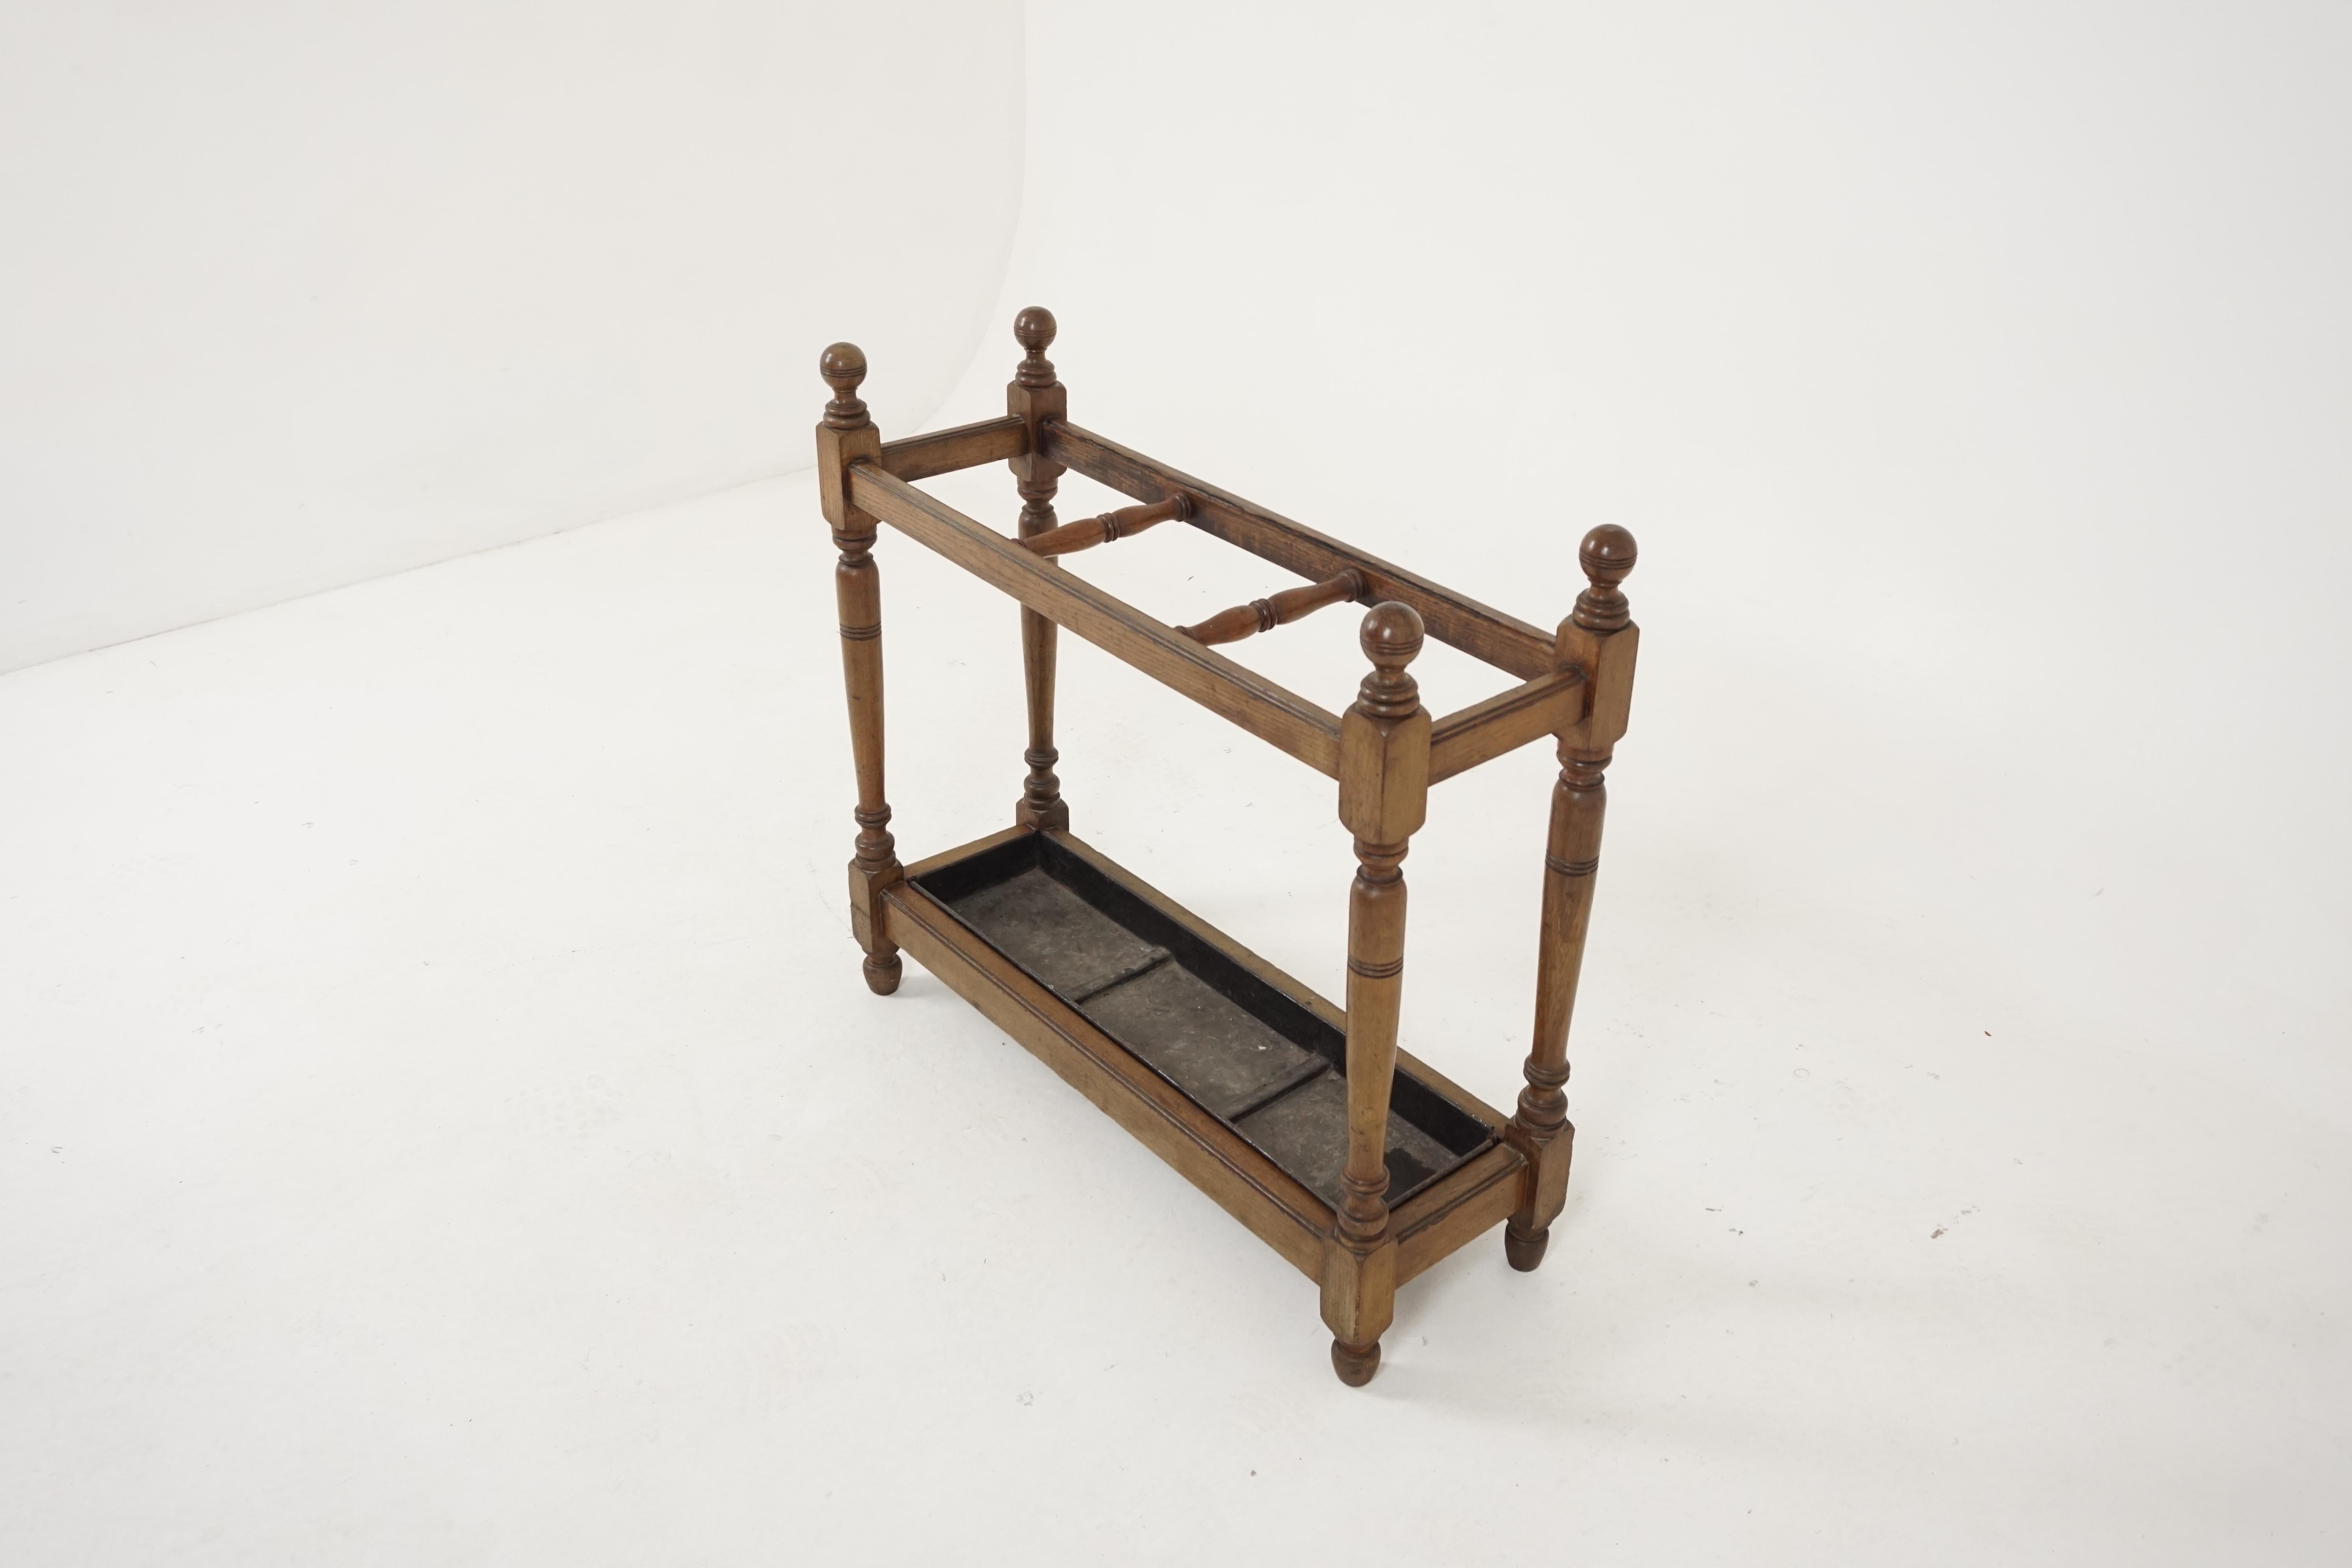 Antique stick stand, Victorian oak umbrella stand, antique furniture, Scotland 1895, B1897

Scotland 1895
Solid oak
Original finish
The stand has four turned supports
Two divisions to hold the umbrellas or sticks
Removable metal drip